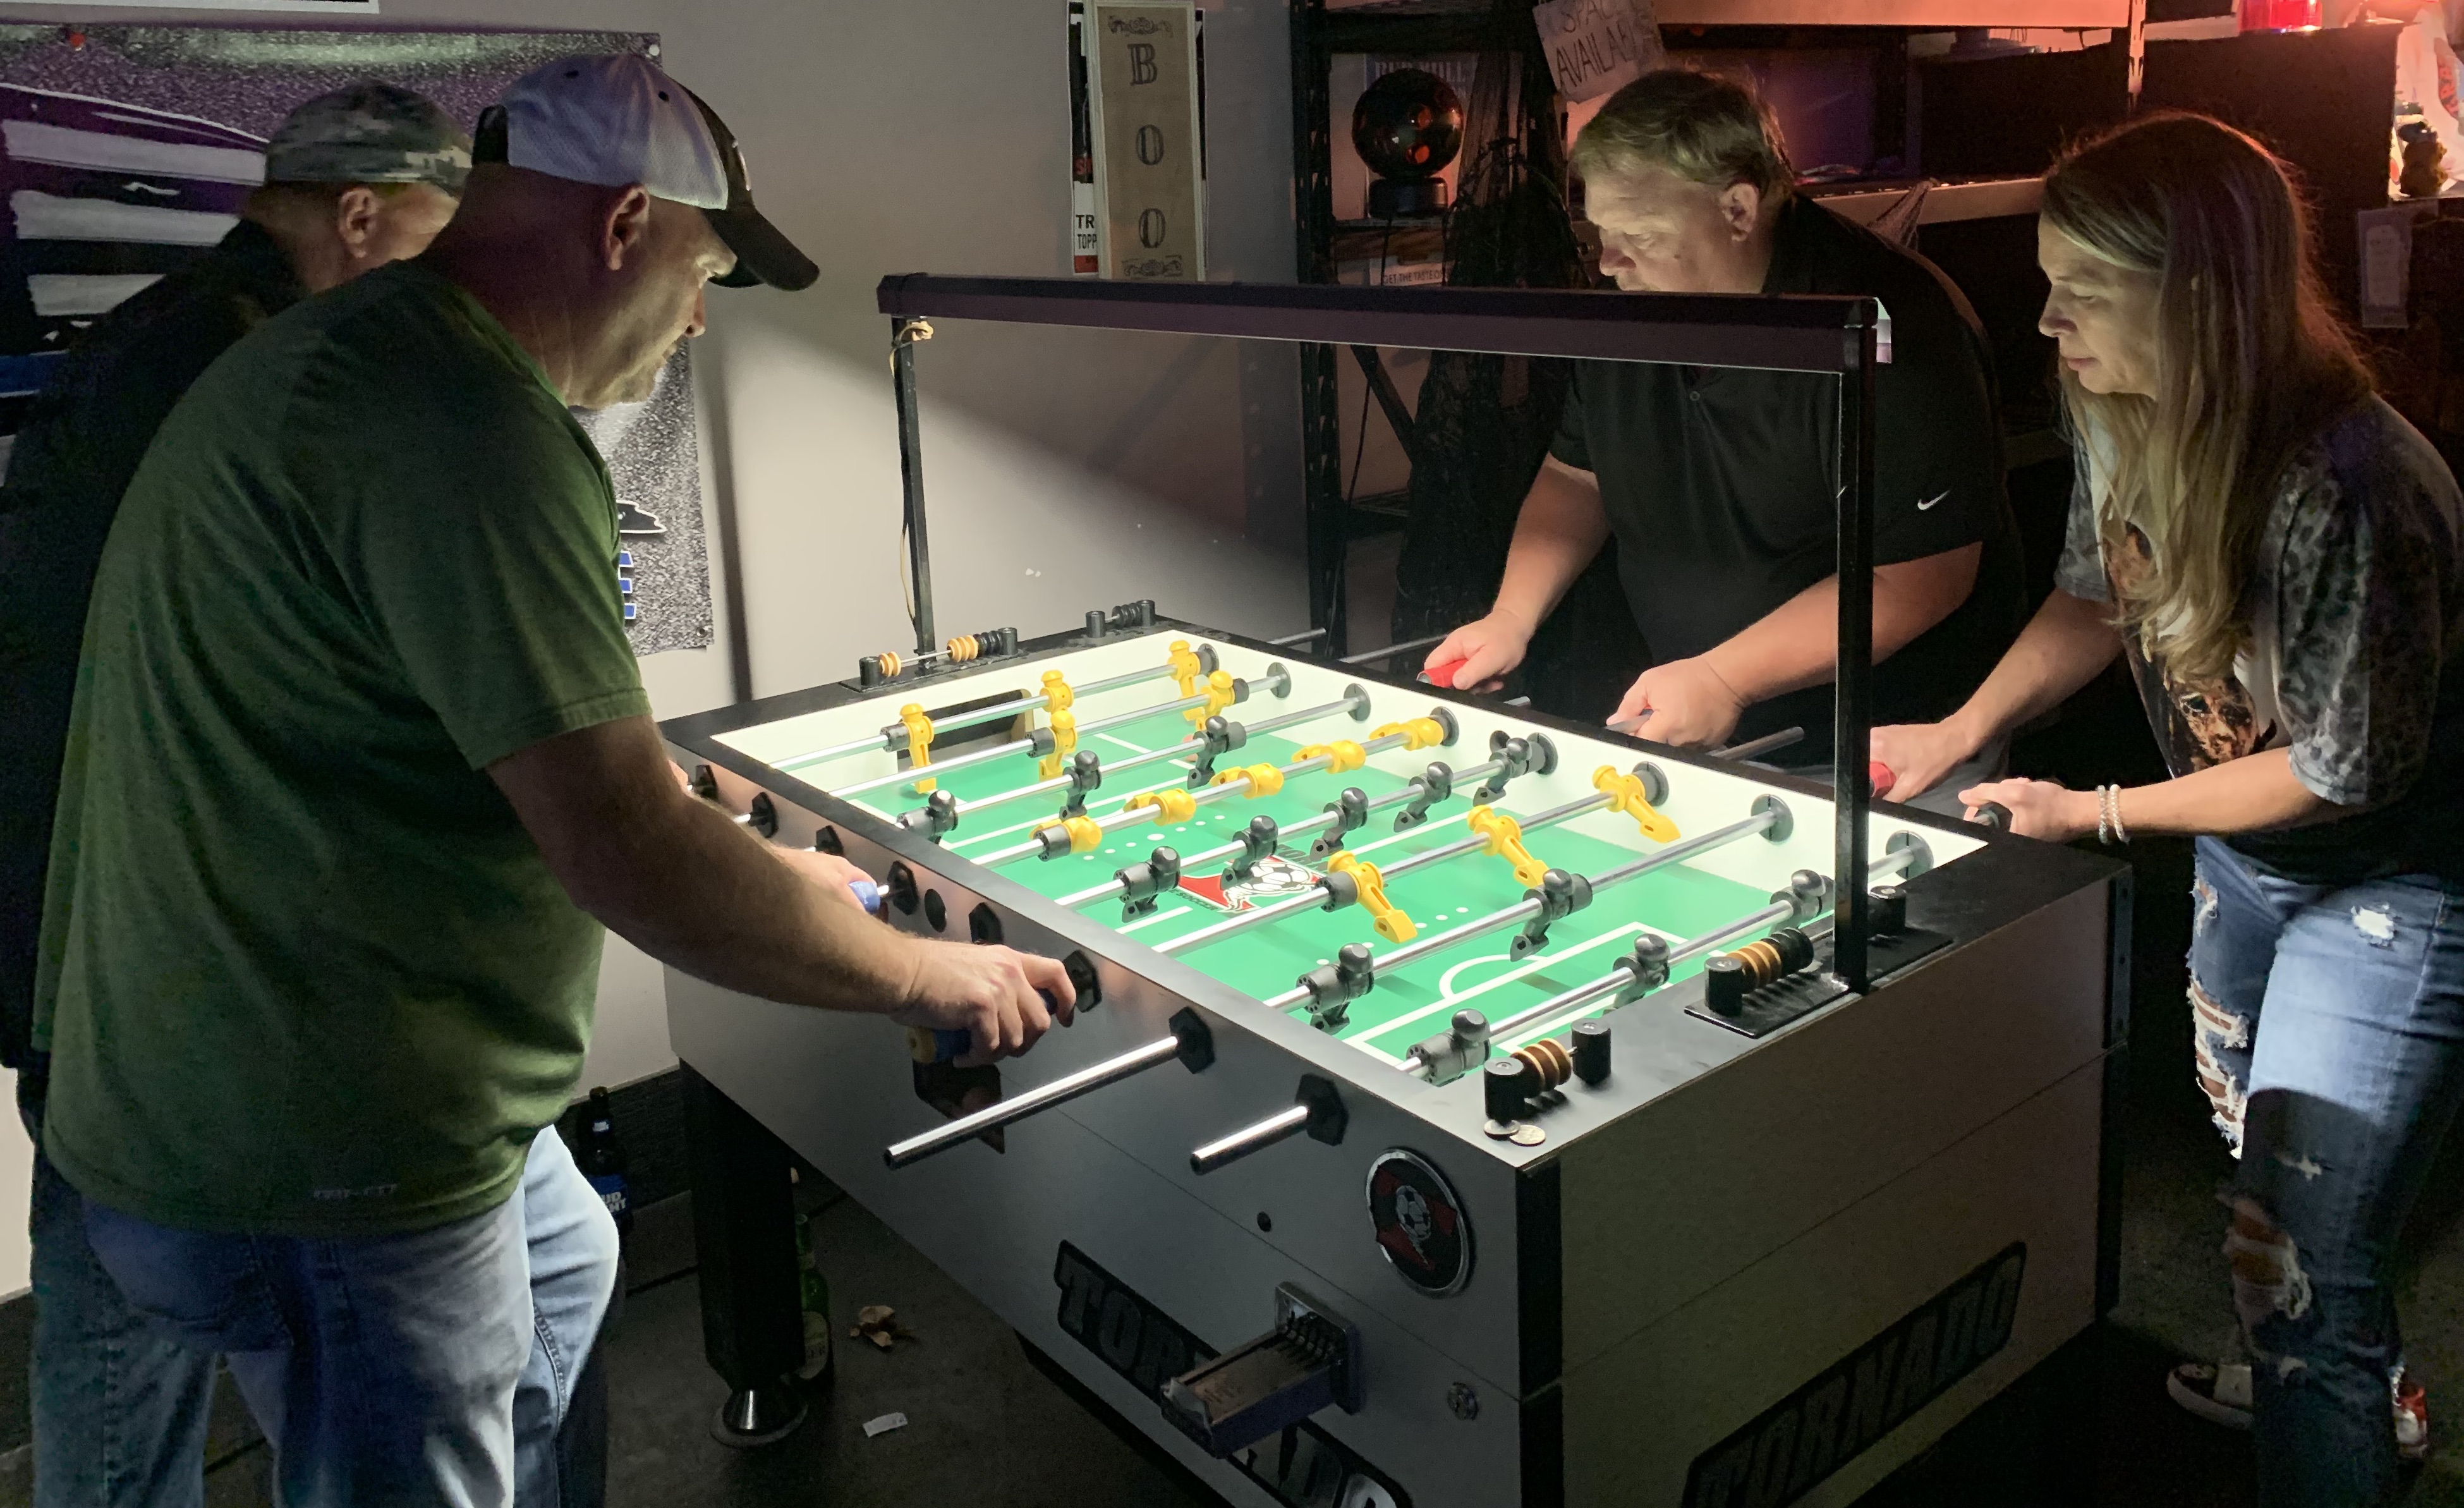 A championship match for the title of the 1st of a series of $200 Added! Foos-Friday events held at Van's Bar in Leeds,AL. this October 28 2022. Steve Dodgen & Mike Camp won the tournament while Bill McBurnett & Kelly Parrett were runners-up.